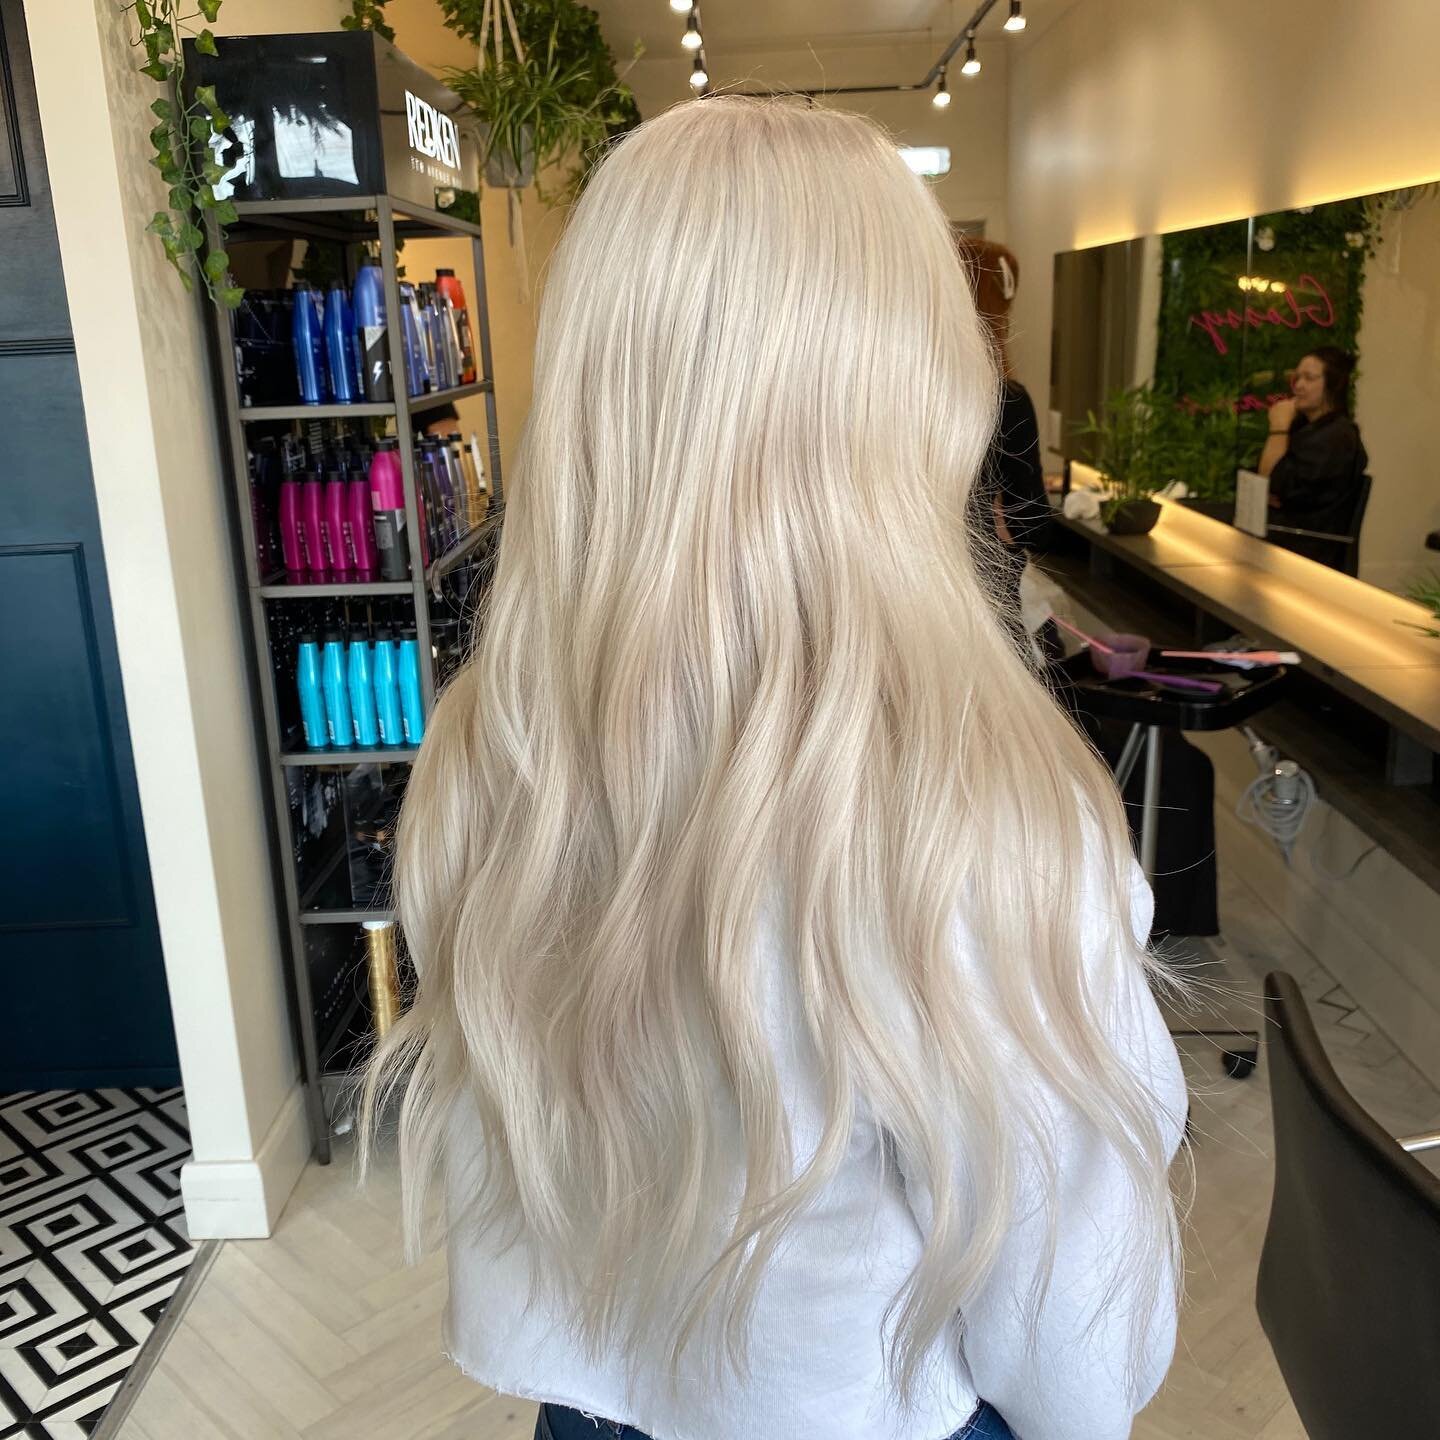 TRANSFO!!! This major colour change ain&rsquo;t for the faint hearted, it&rsquo;ll take maintenance and care - but sometimes - you just can&rsquo;t beat a scalp bleach! This was a team effort, with the help of our favourite #redken products! She&rsqu